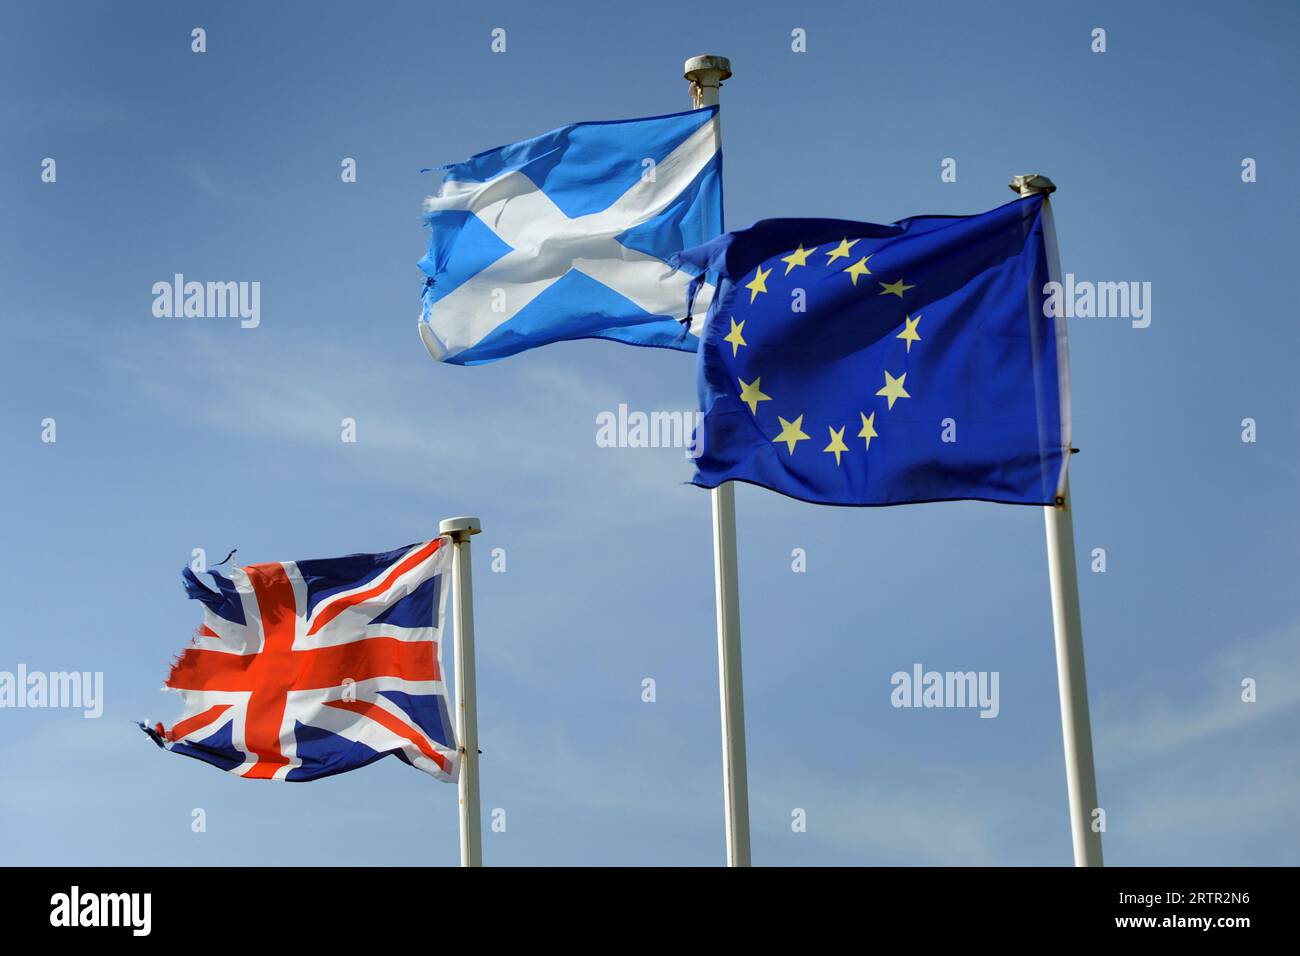 UNION JACK SCOTLAND AND EUROPEAN UNION FLAGS ON FLAGPOLES WITH BLUE SKY RE BREXIT THE UNION FLAGS PATRIOT PATRIOTIC UK Stock Photo